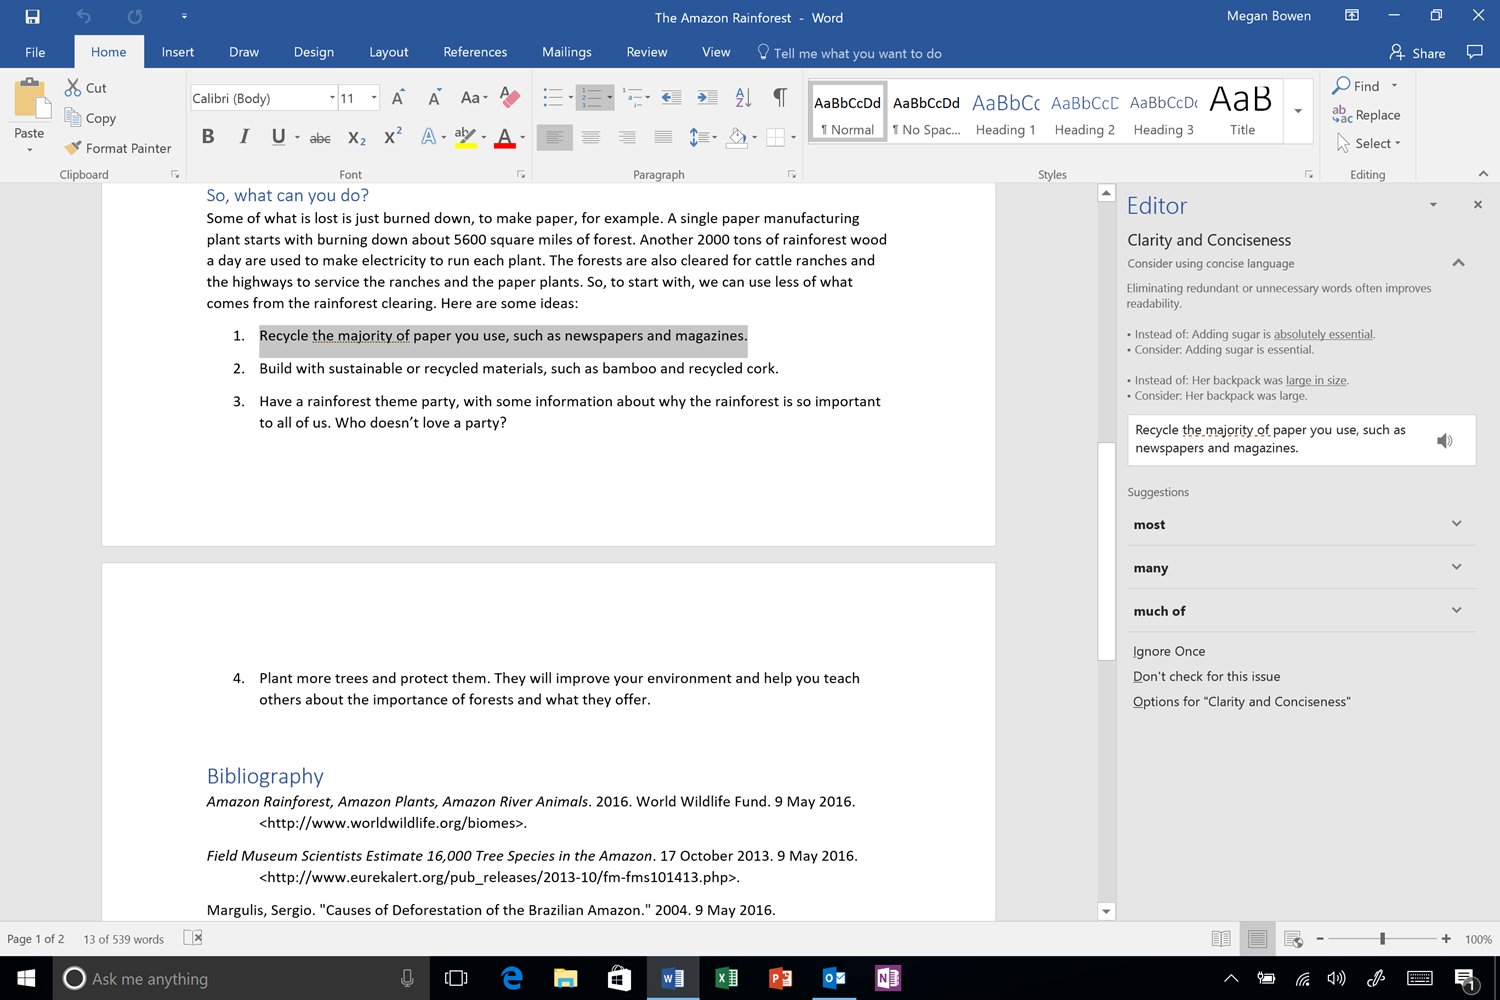 The new Editor pane is being shown alongside a document being written. The Editor pane is showing recommendations for more concise language for a highlighted passage.